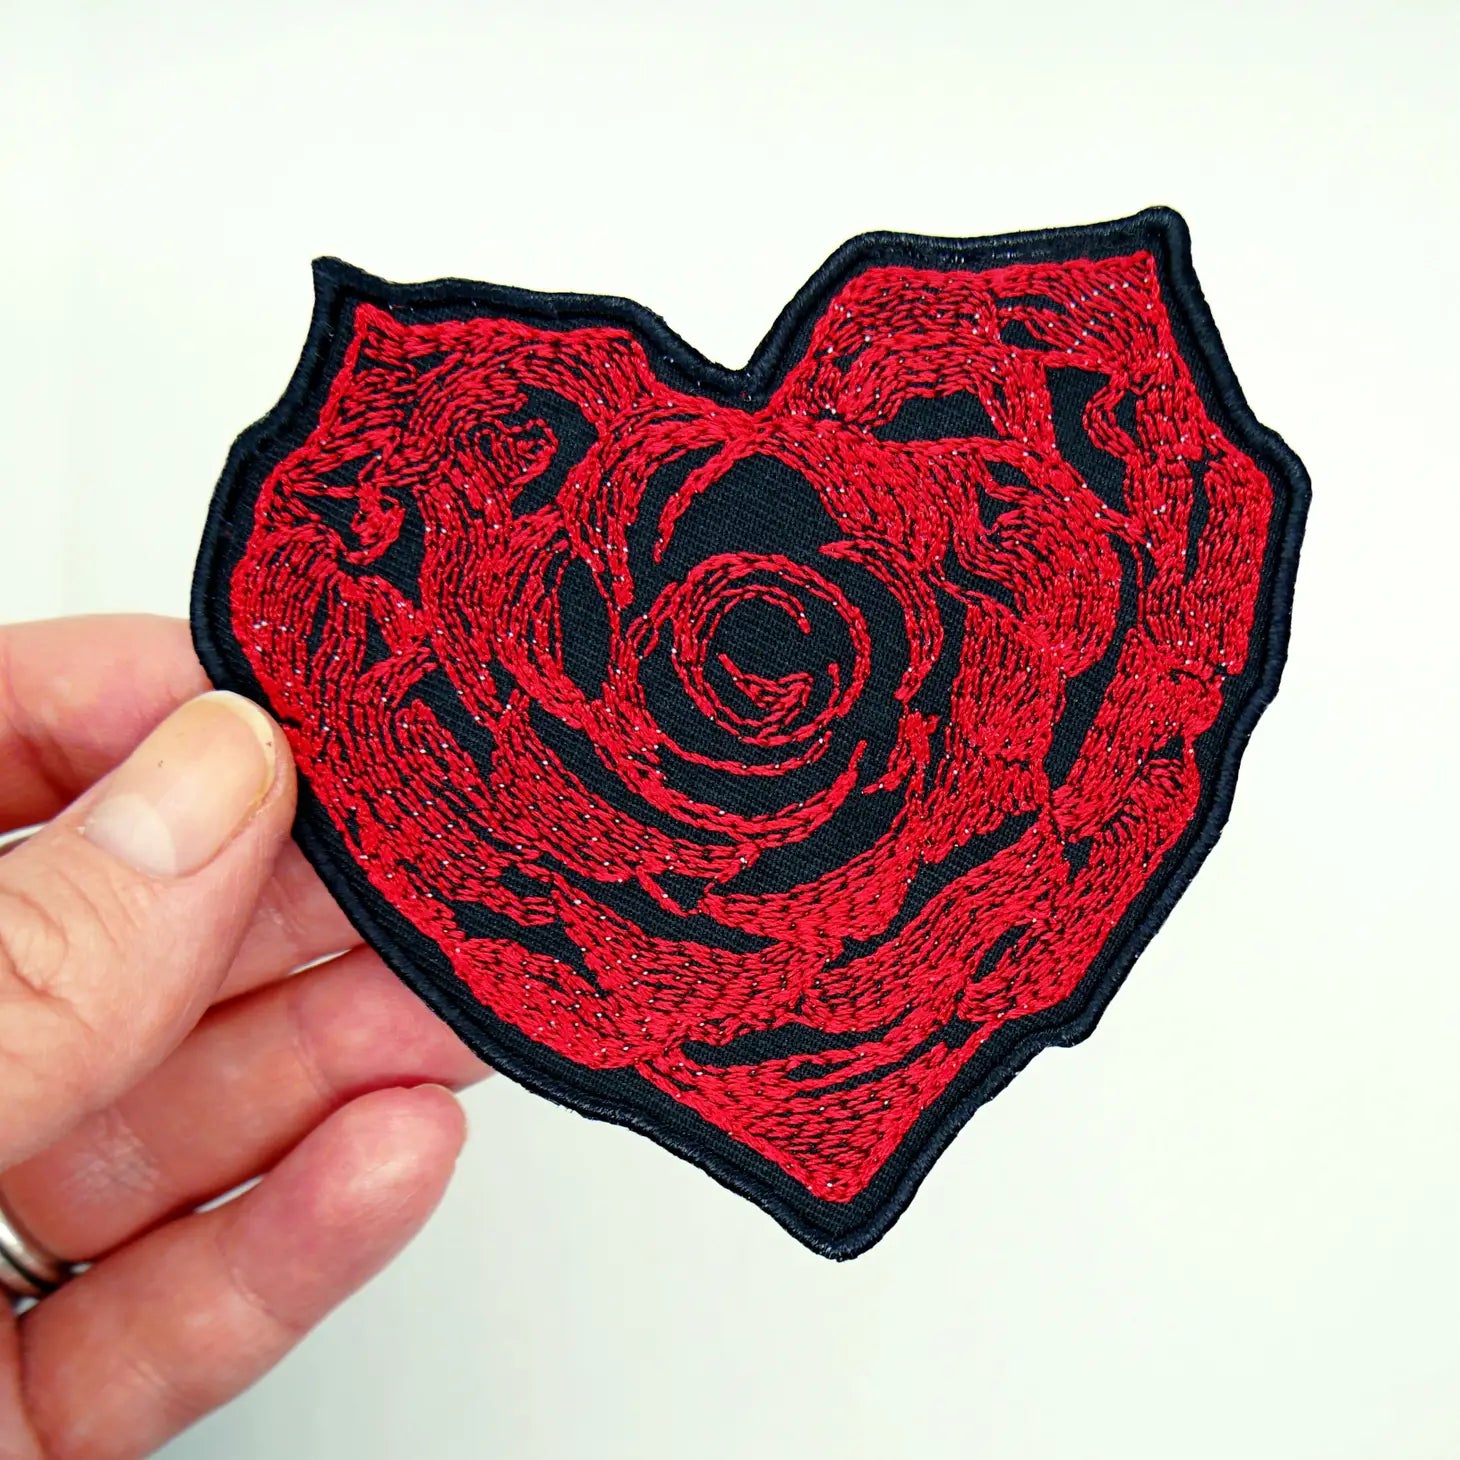 An intricate red rose embroidered patch in the shape of a heart on a black background. Held by a hand